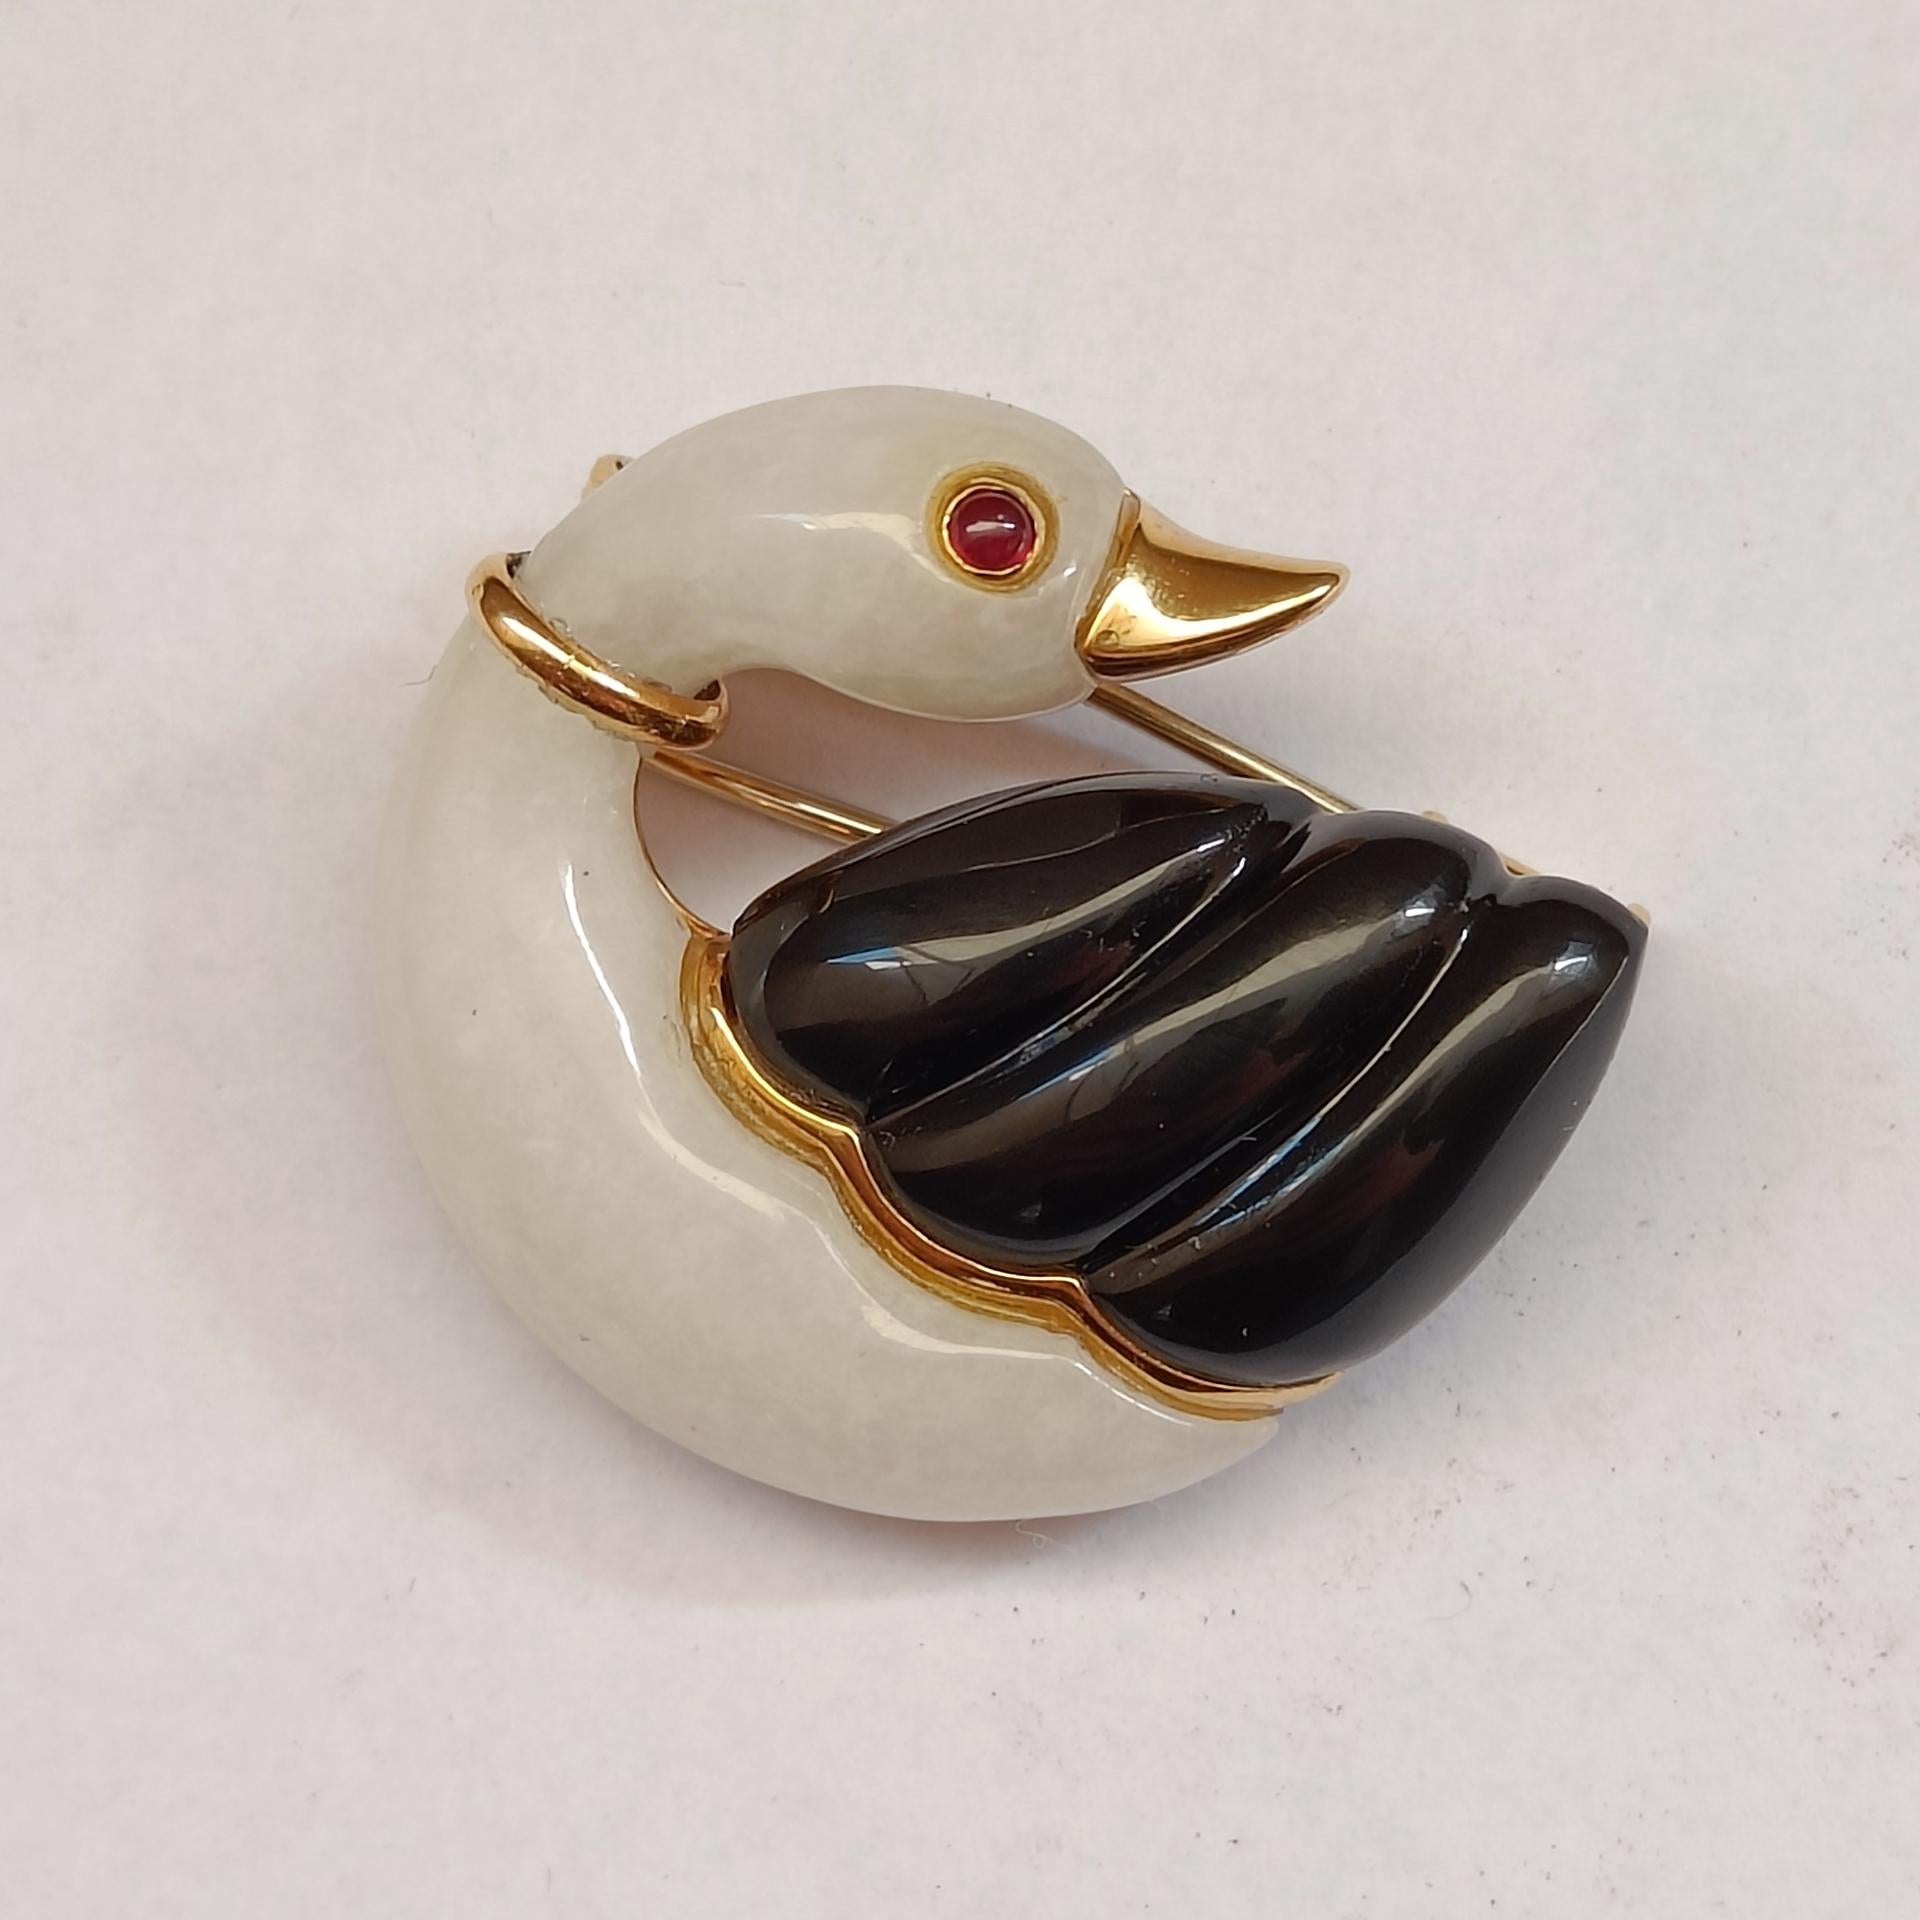 An onyx, white chalcedony, ruby and 18k gold swan clip brooch.
Stamped 750. Very good condition.

Dimensions 3x3 cm (approx.)
Weight 12.5 grams